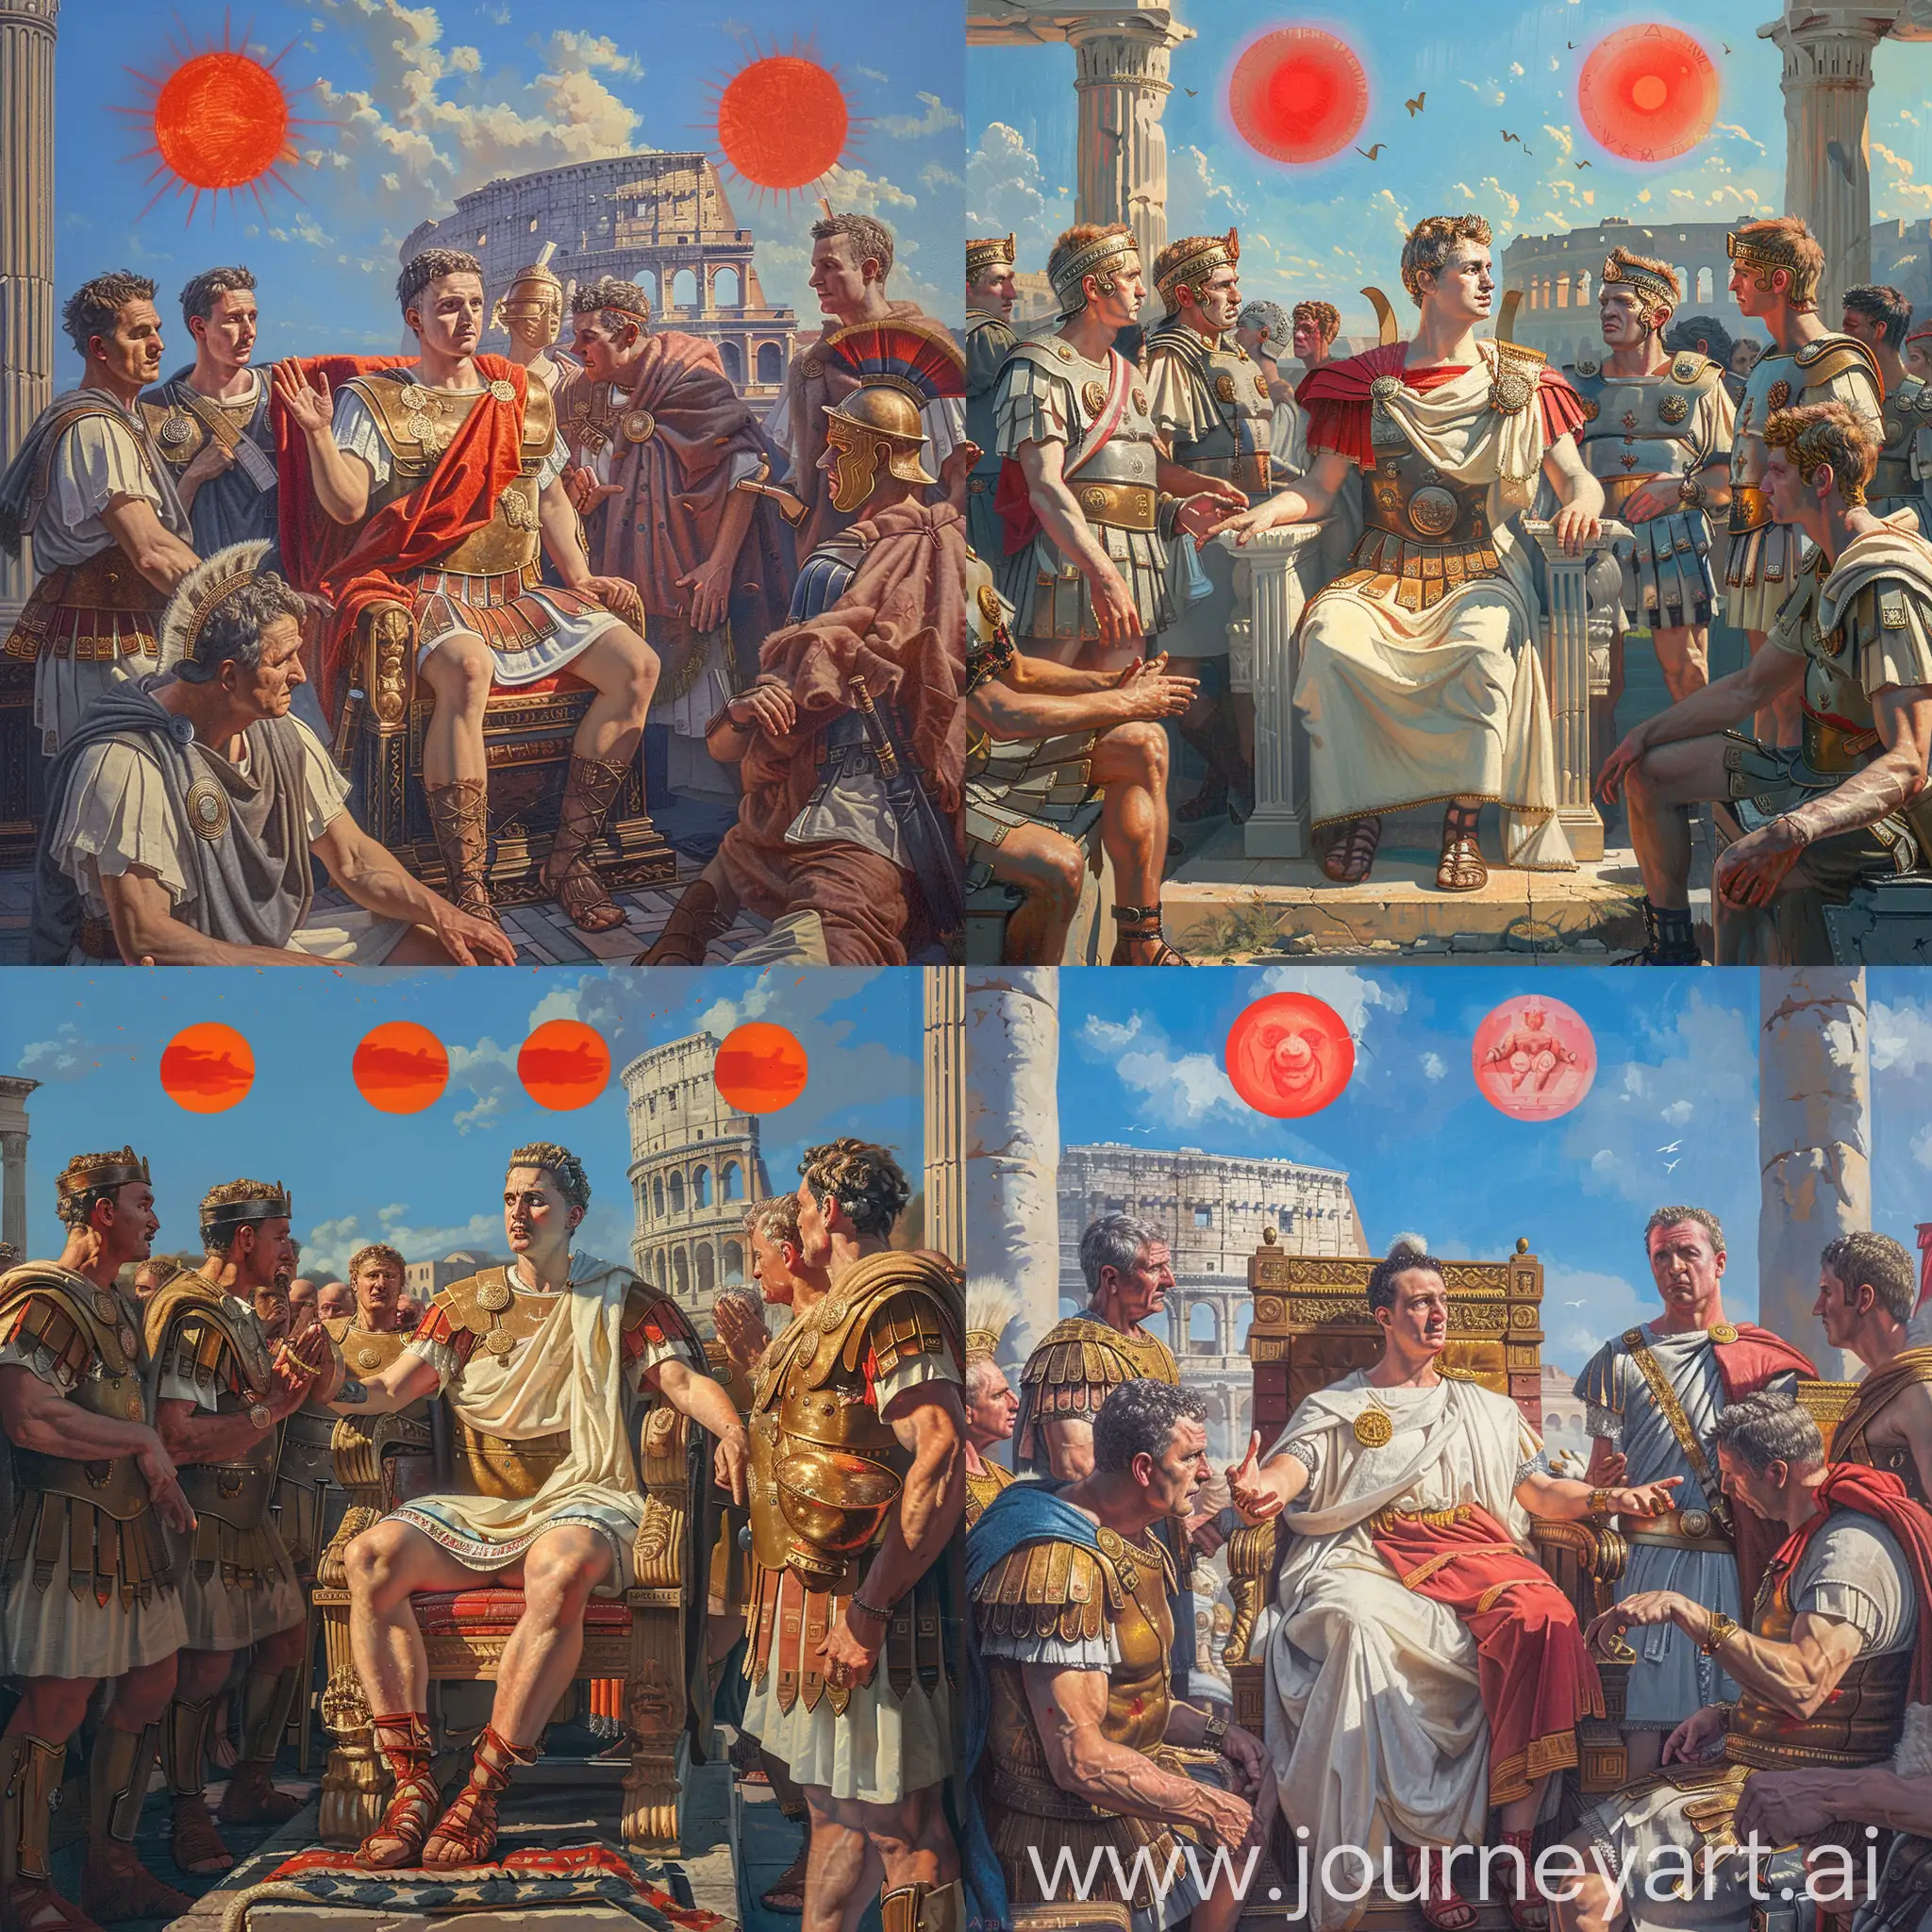 Historic painting style: 

An young 40 years old's Julius Caesar is sitting on his imperial throne in the middle, he is confident and elegant.

Other Roman praetorian guards and legionaries are next to Julius Caesar, they are greeting Julius Caesar.

The background is ancient Rome Colosseum behind far away, three red suns in the blue sky.